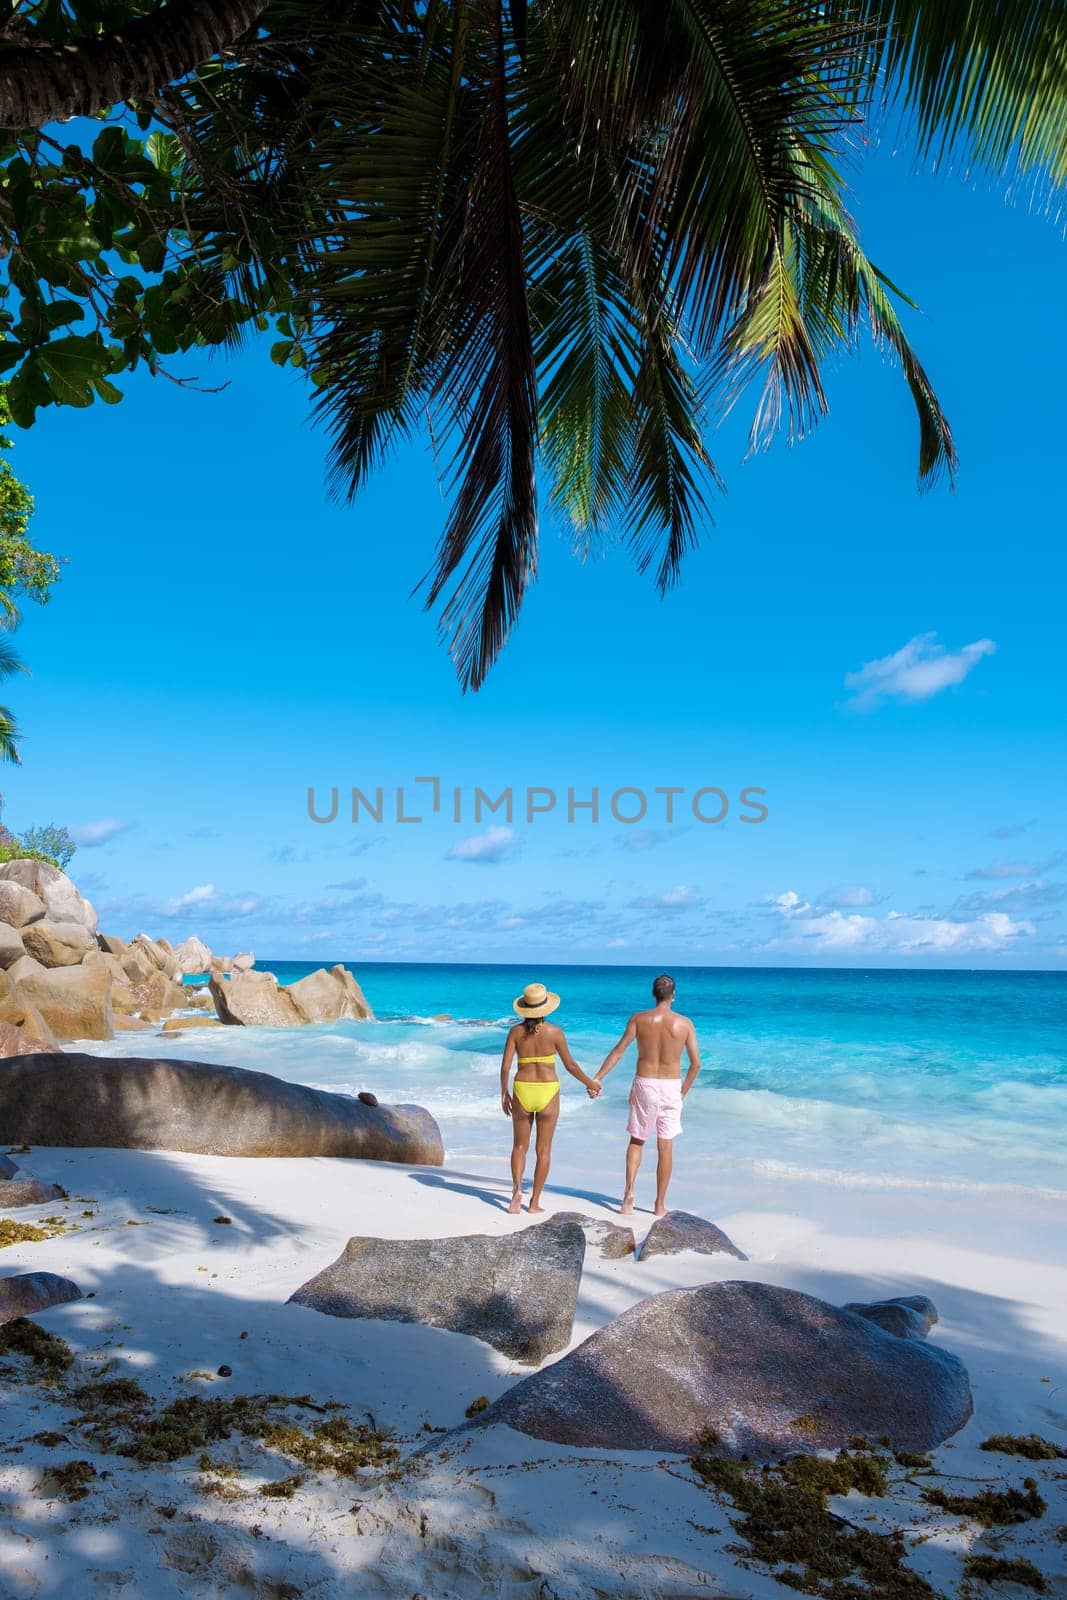 Anse Lazio Praslin Seychelles, a young couple of men and women on a tropical beach during a luxury vacation at the Seychelles. Tropical beach Anse Lazio Praslin Seychelles Islands